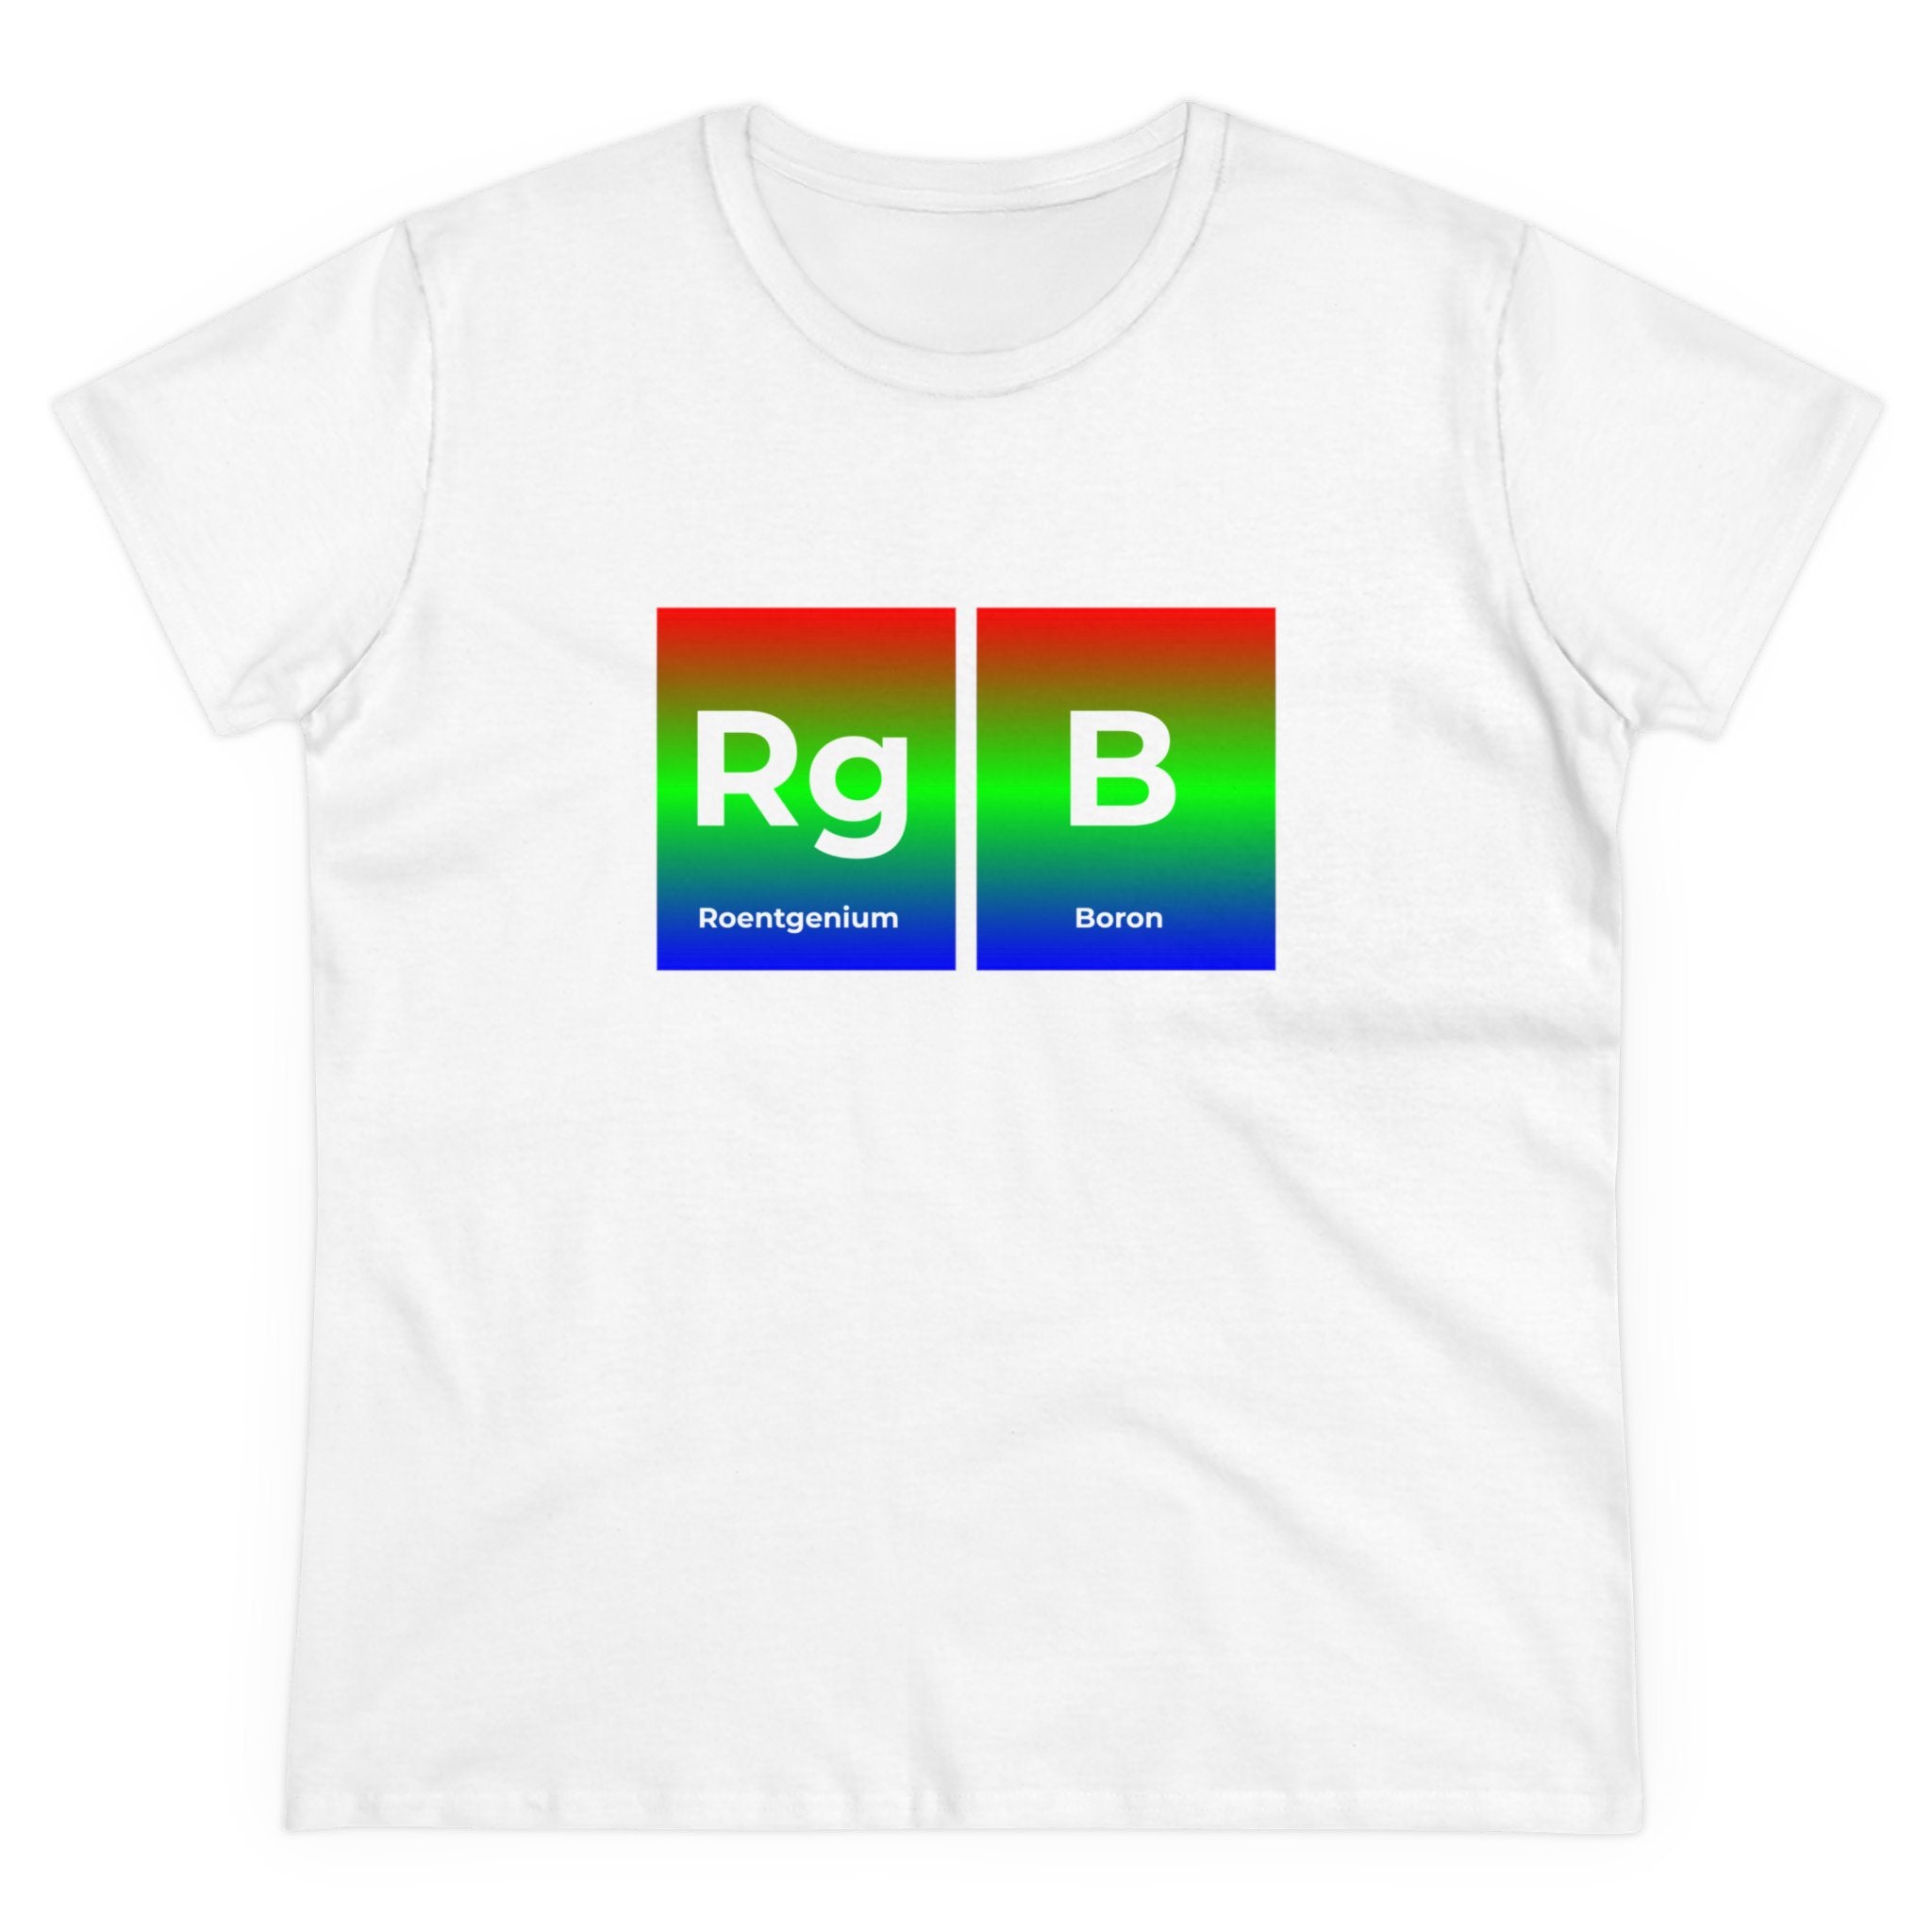 RG-B - Women's Tee featuring two periodic table elements, "Roentgenium (Rg)" and "Boron (B)," on a gradient background of red, green, and blue—an ideal choice for those who value ethical fashion.